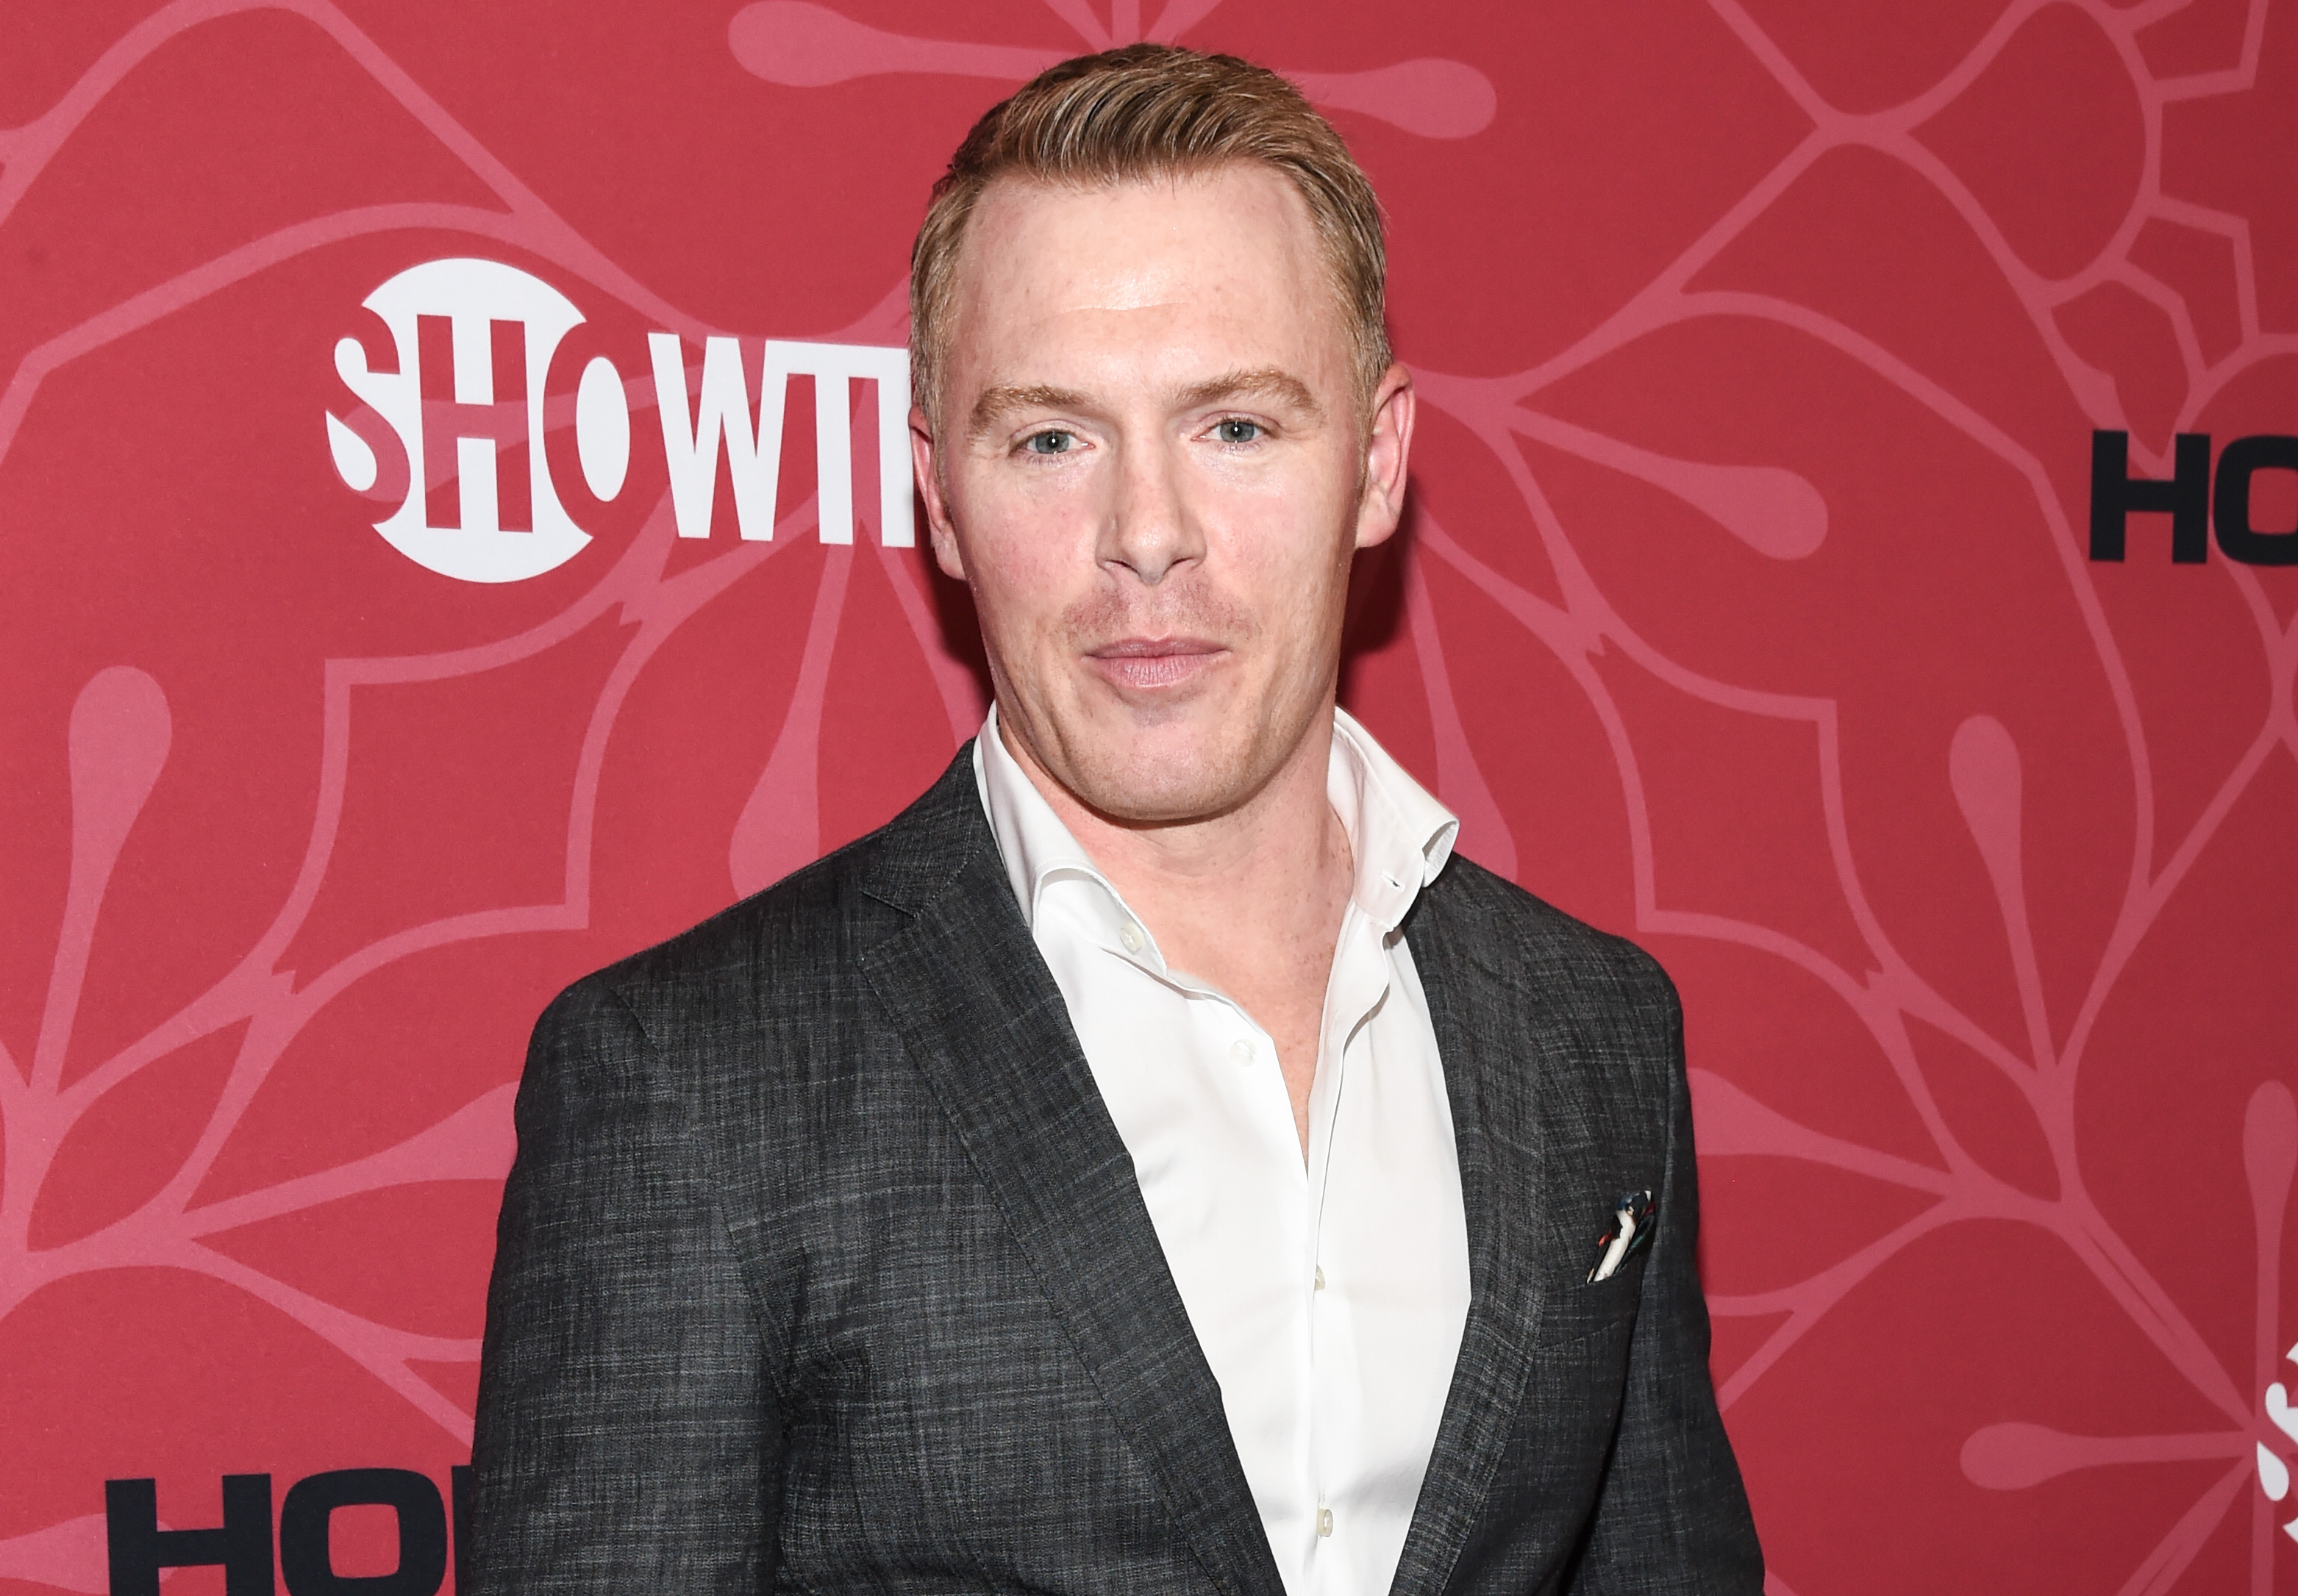 Diego Klattenhoff attends Showtime's "Homeland" Season 8 premiere at the Museum of Modern Art on February 4, 2020, in New York City. | Source: Getty Images